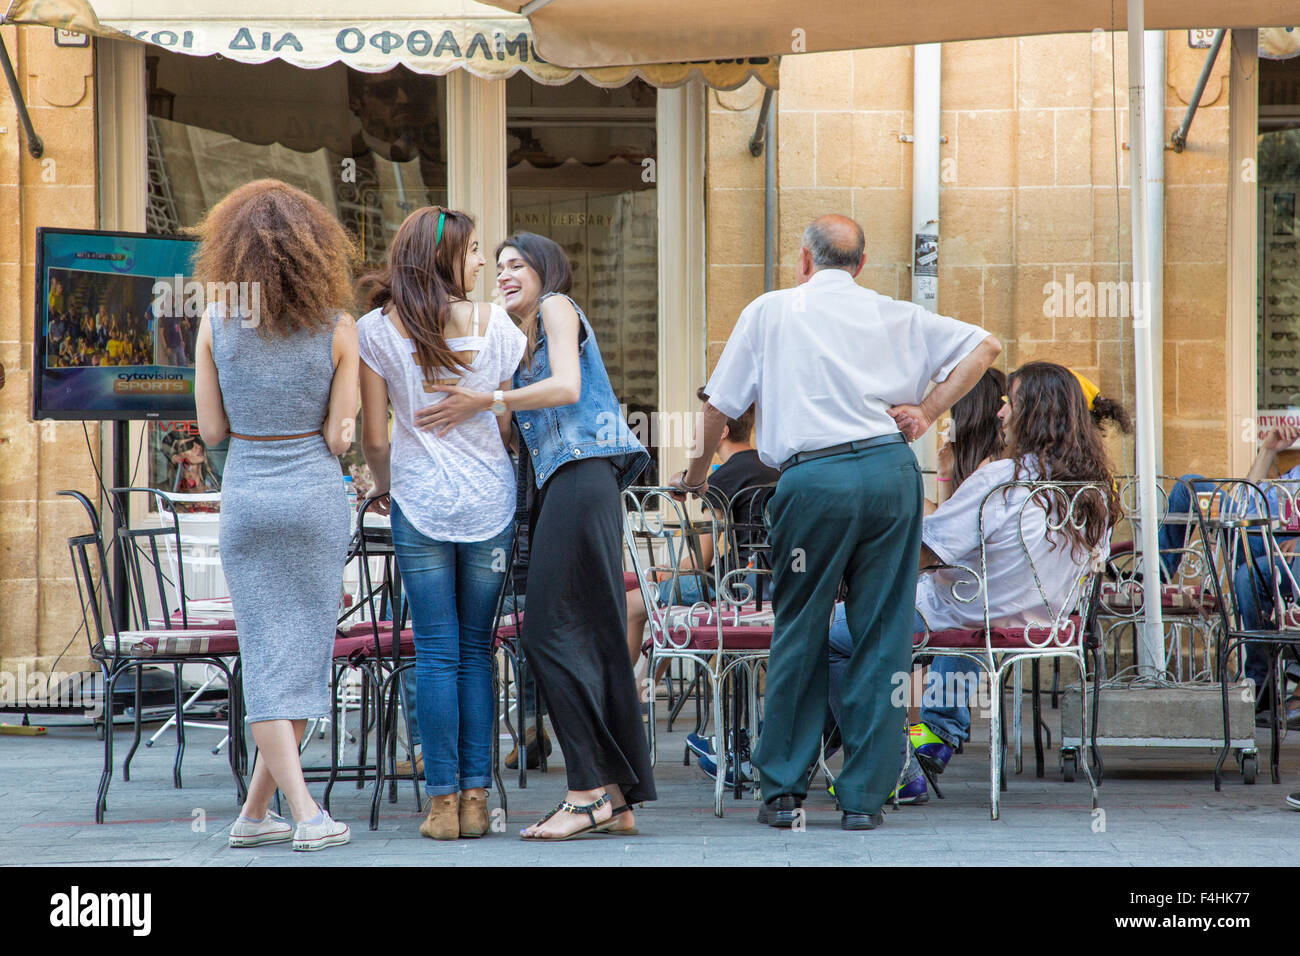 Patrons watching soccer match in outdoor cafe, Lefkosia (Nicosia), Cyprus. Stock Photo